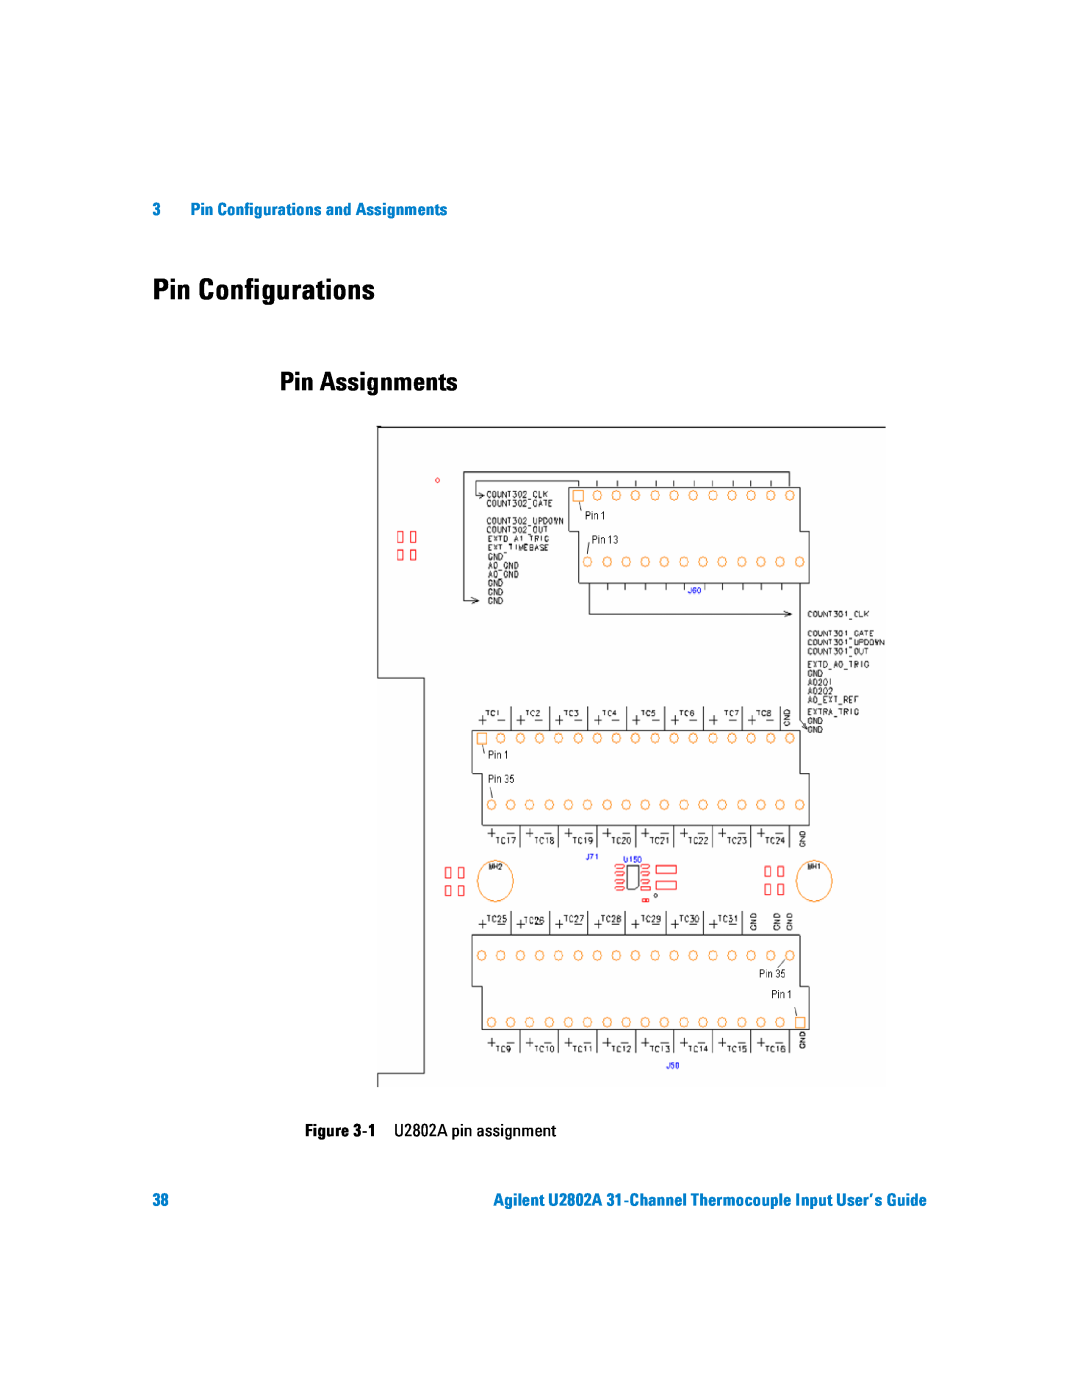 Agilent Technologies manual Pin Assignments, Pin Configurations and Assignments, 1 U2802A pin assignment 